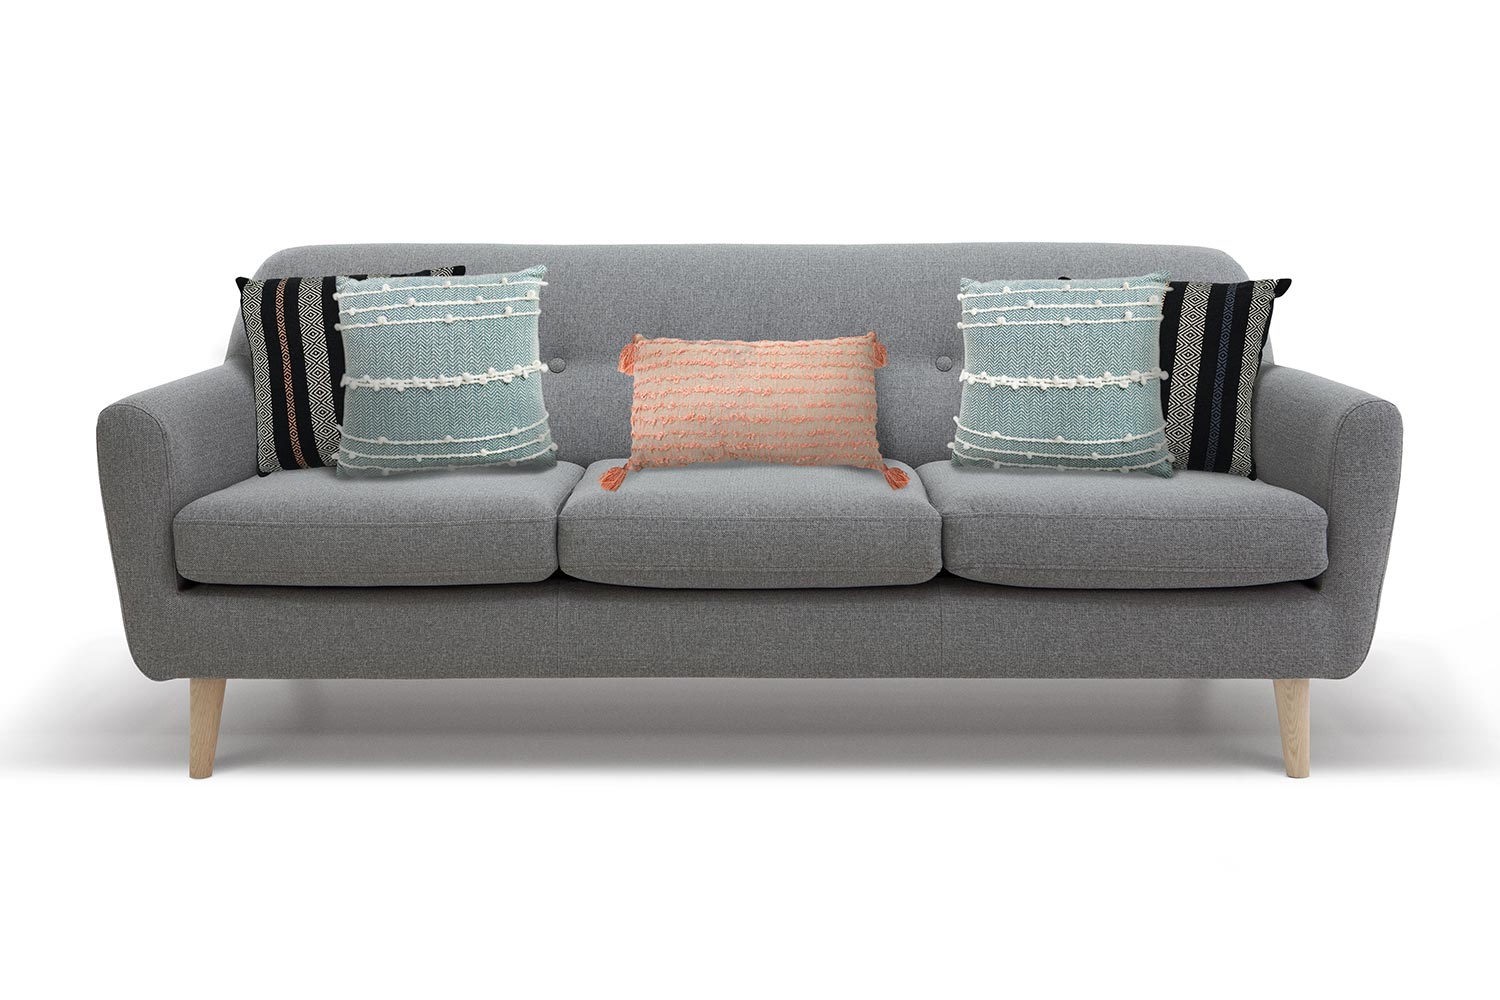 Grey couch with five pillows, two in either corner and one lumbar pillow in the middle